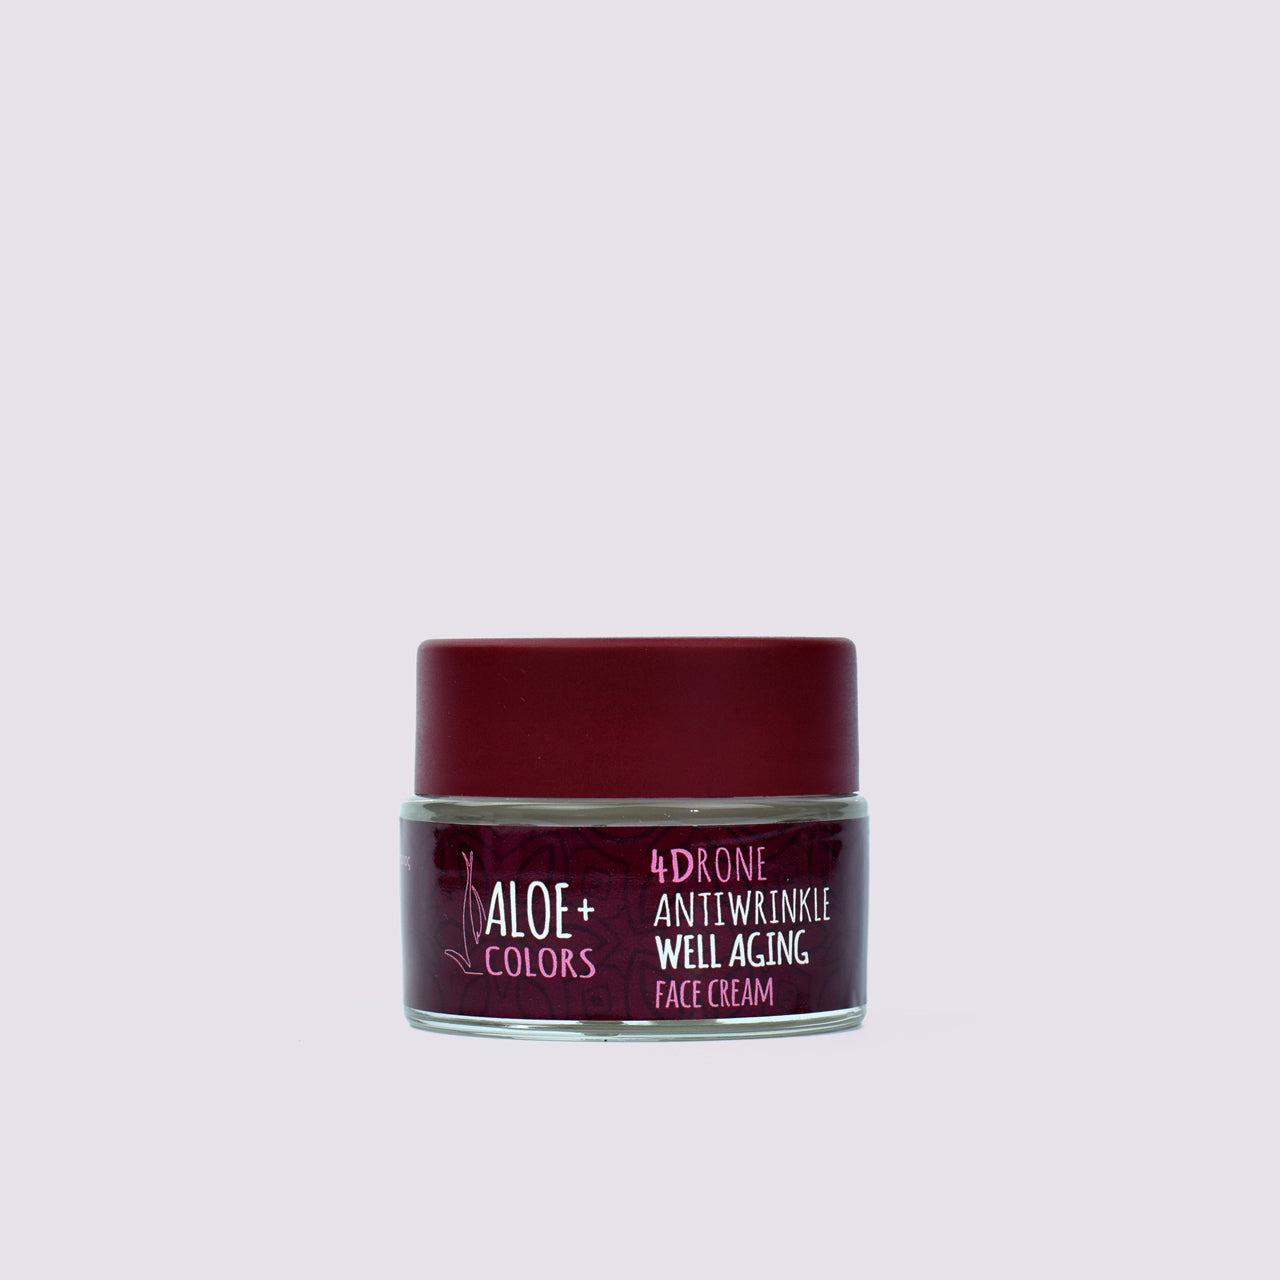 Well Aging Antiwrinkle Face Cream